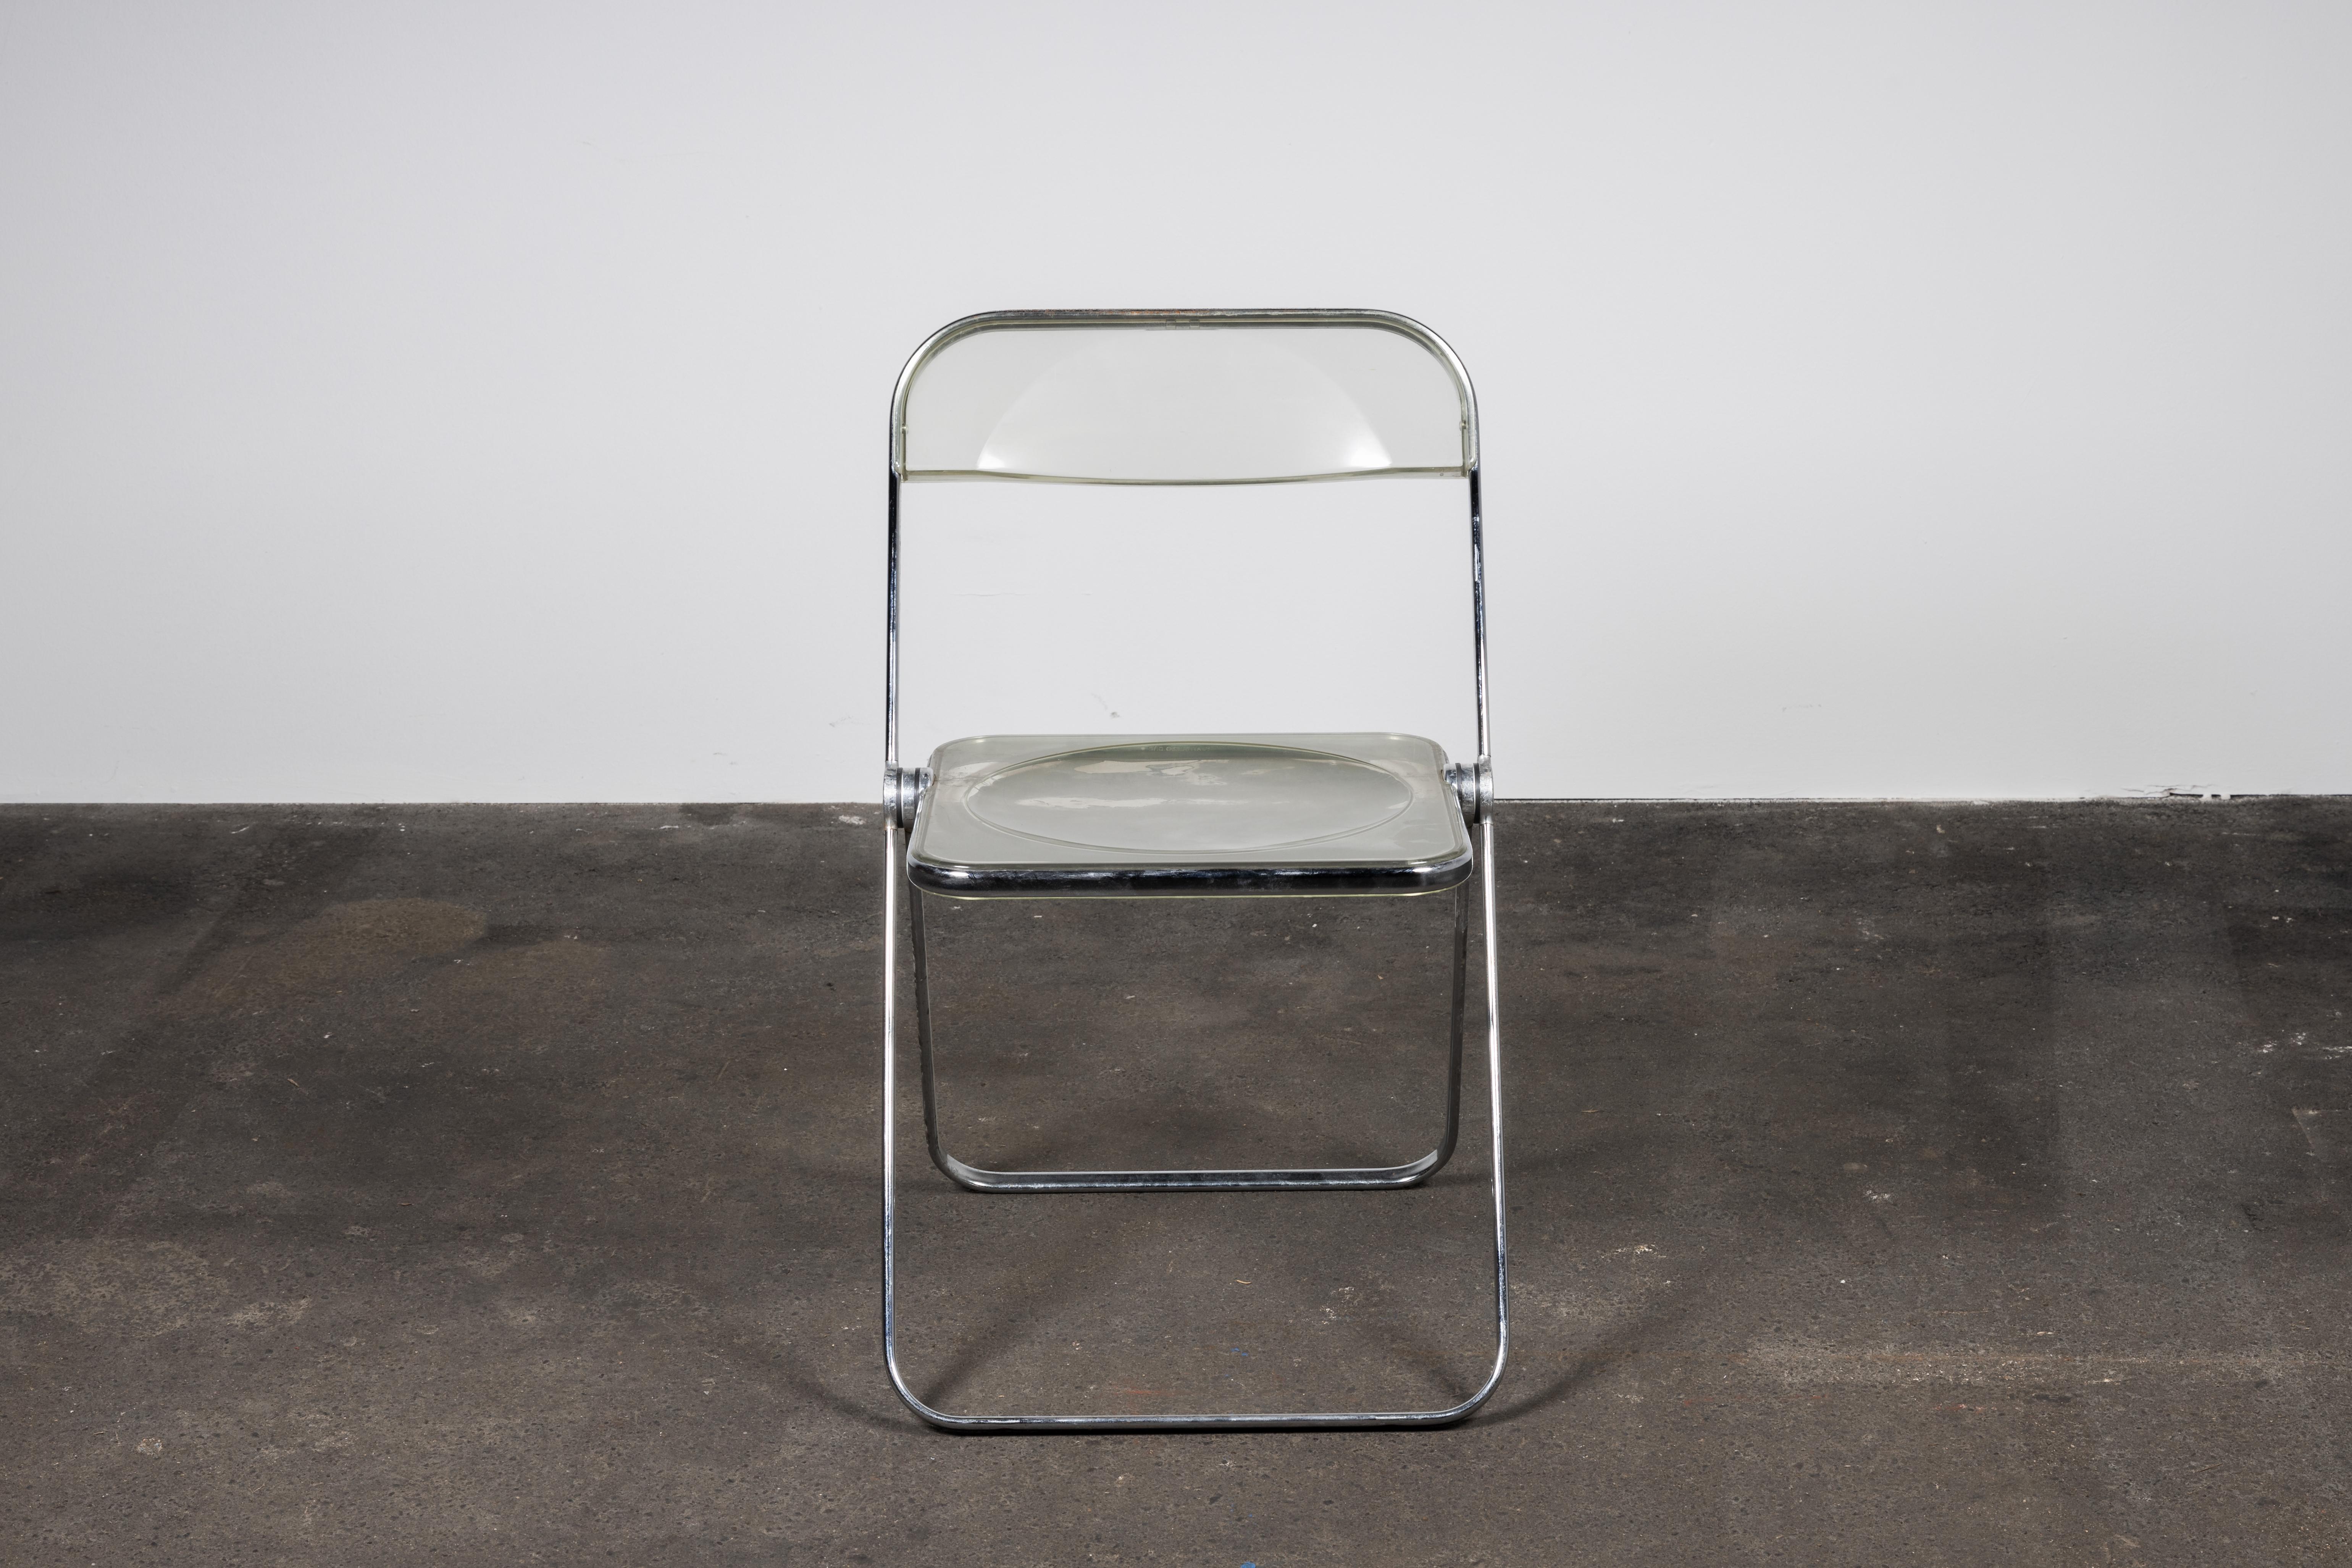 Six Space Age chrome and transparent Lucite folding chairs designed by Giancarlo Piretti for Castelli, Italy. 

With steel frame, seat and back in clear Lucite, it represents the realization of “democratic design” and is exhibited at the MoMa